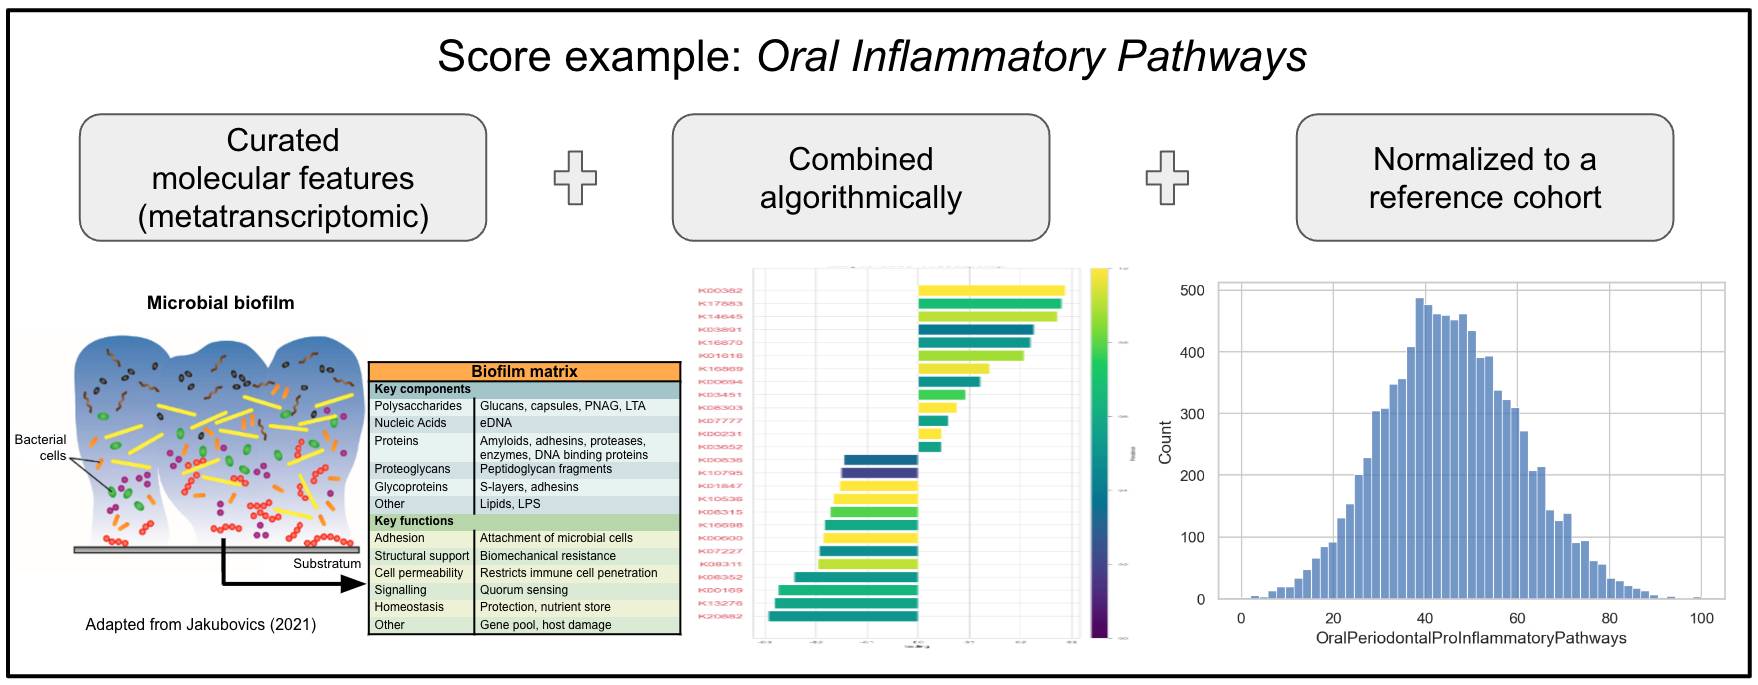 Score example oral inflammatory